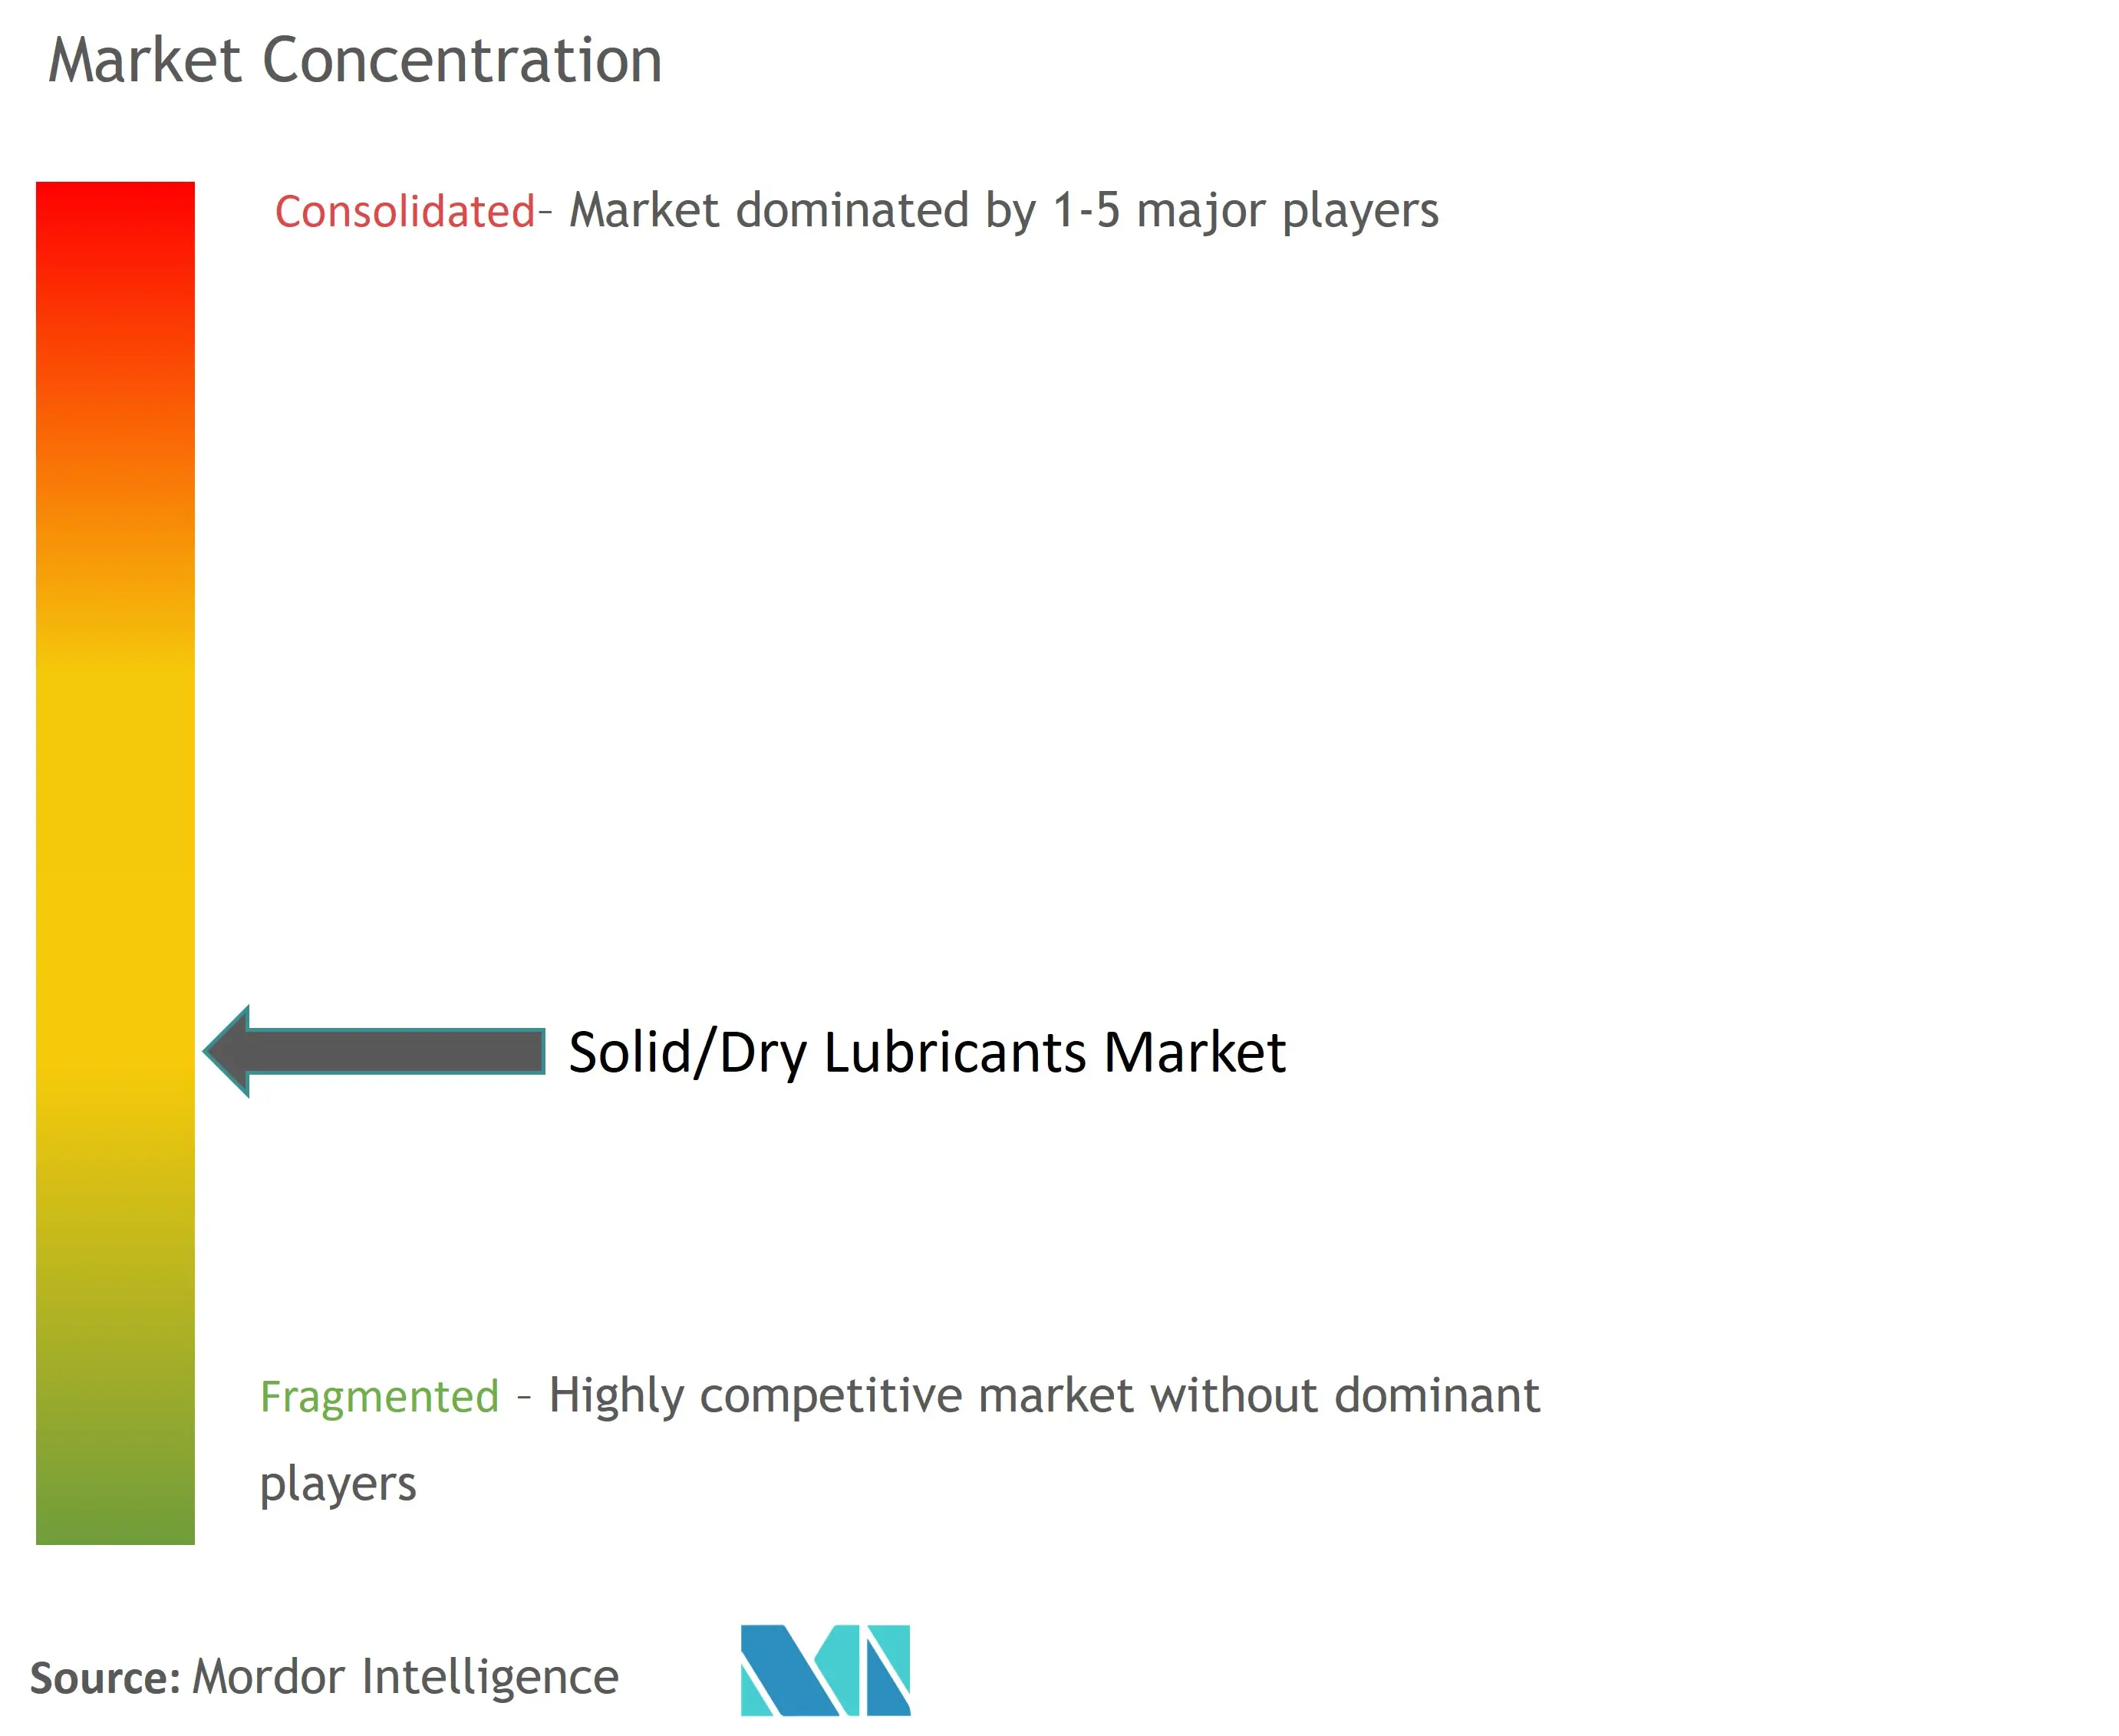 Solid/Dry Lubricants Market Concentration